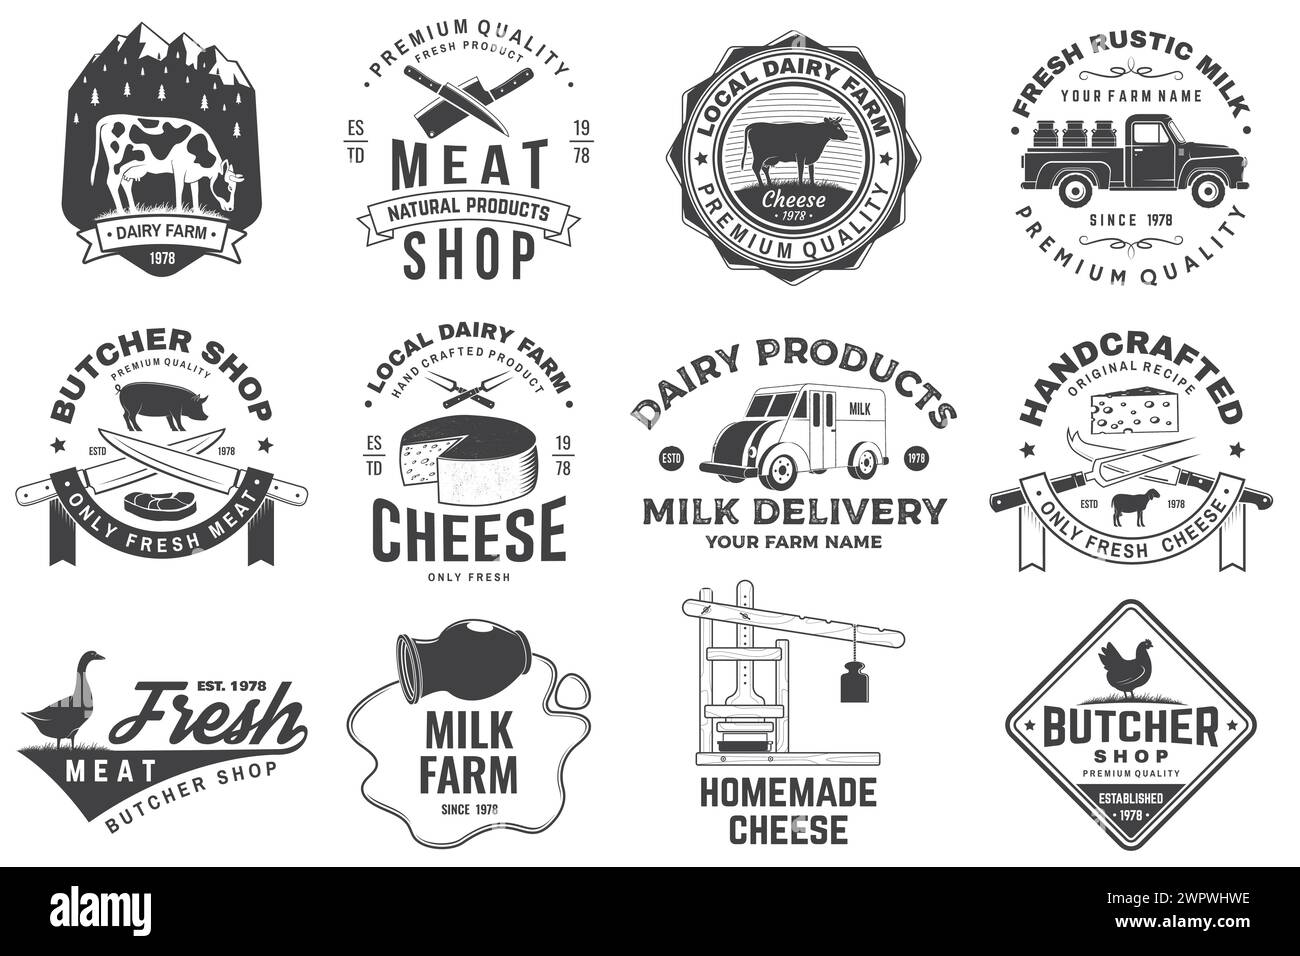 Cheese, butcher, dairy and milk family farm badge design. Template for butcher, cheese, dairy and milk farm business - shop, market, packaging and Stock Vector